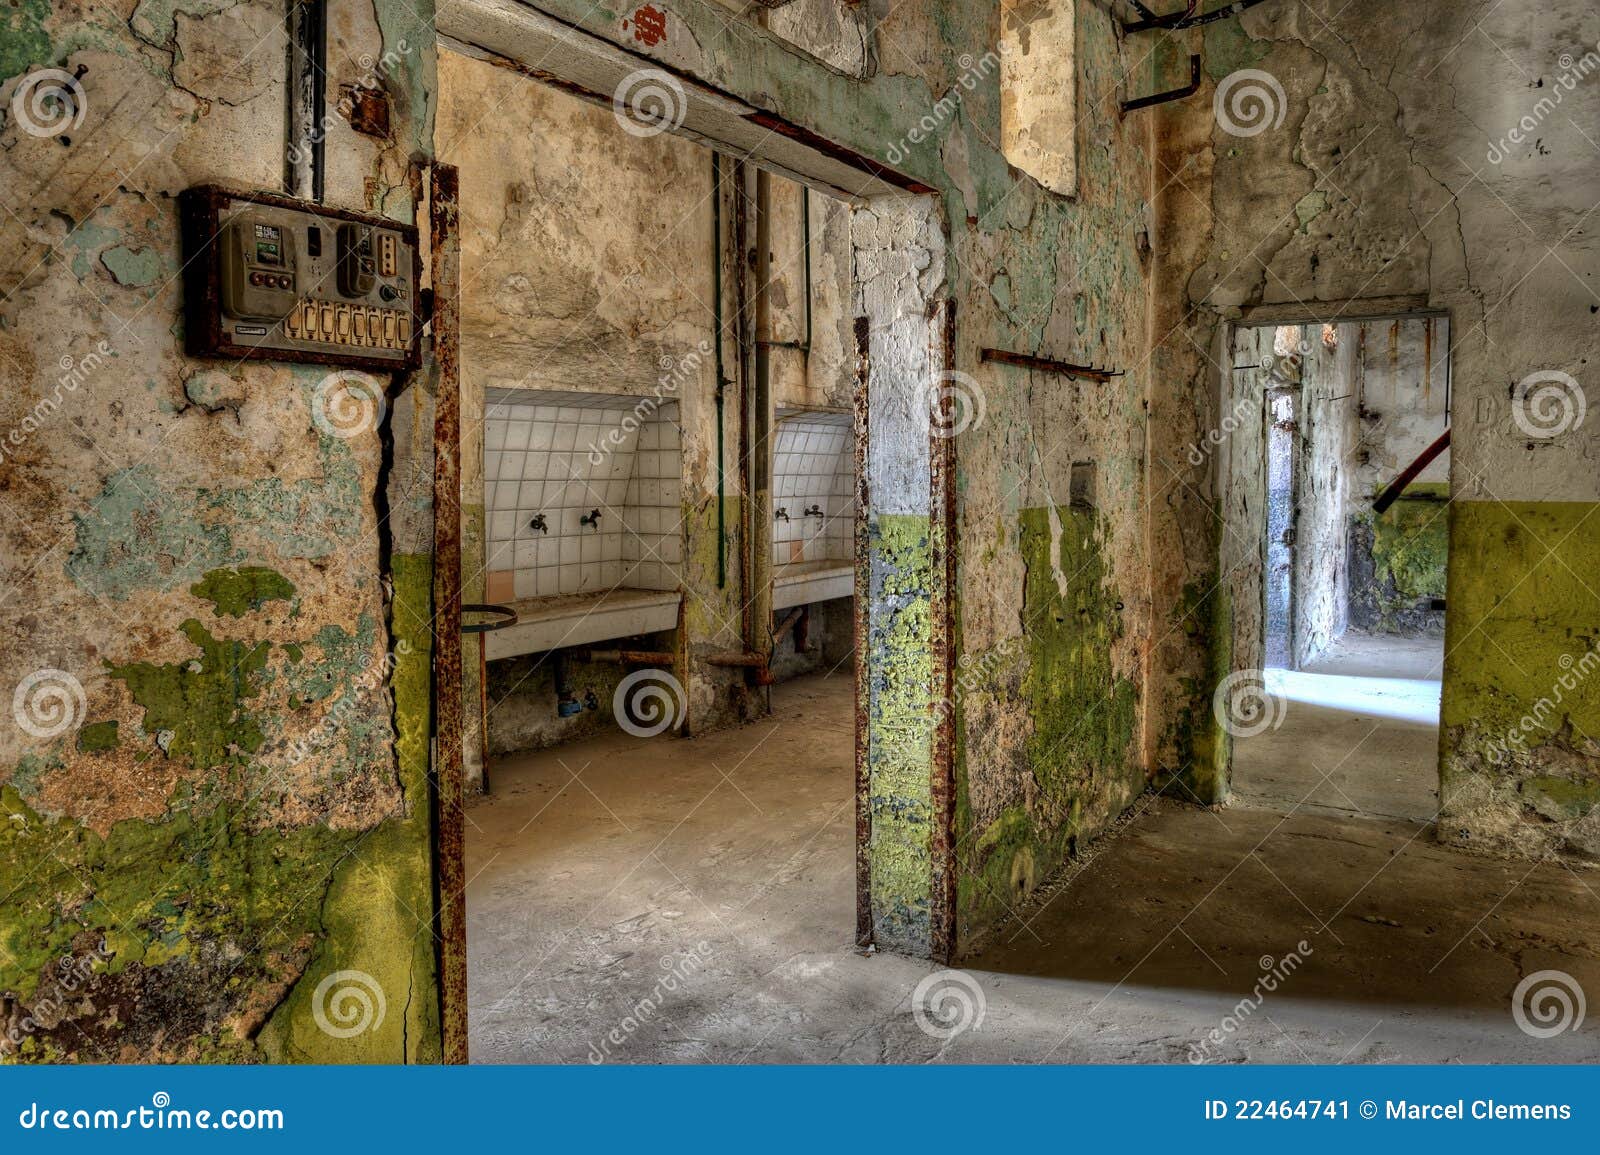 In An Abandoned Prison Stock Image Image of gate, derelict 22464741